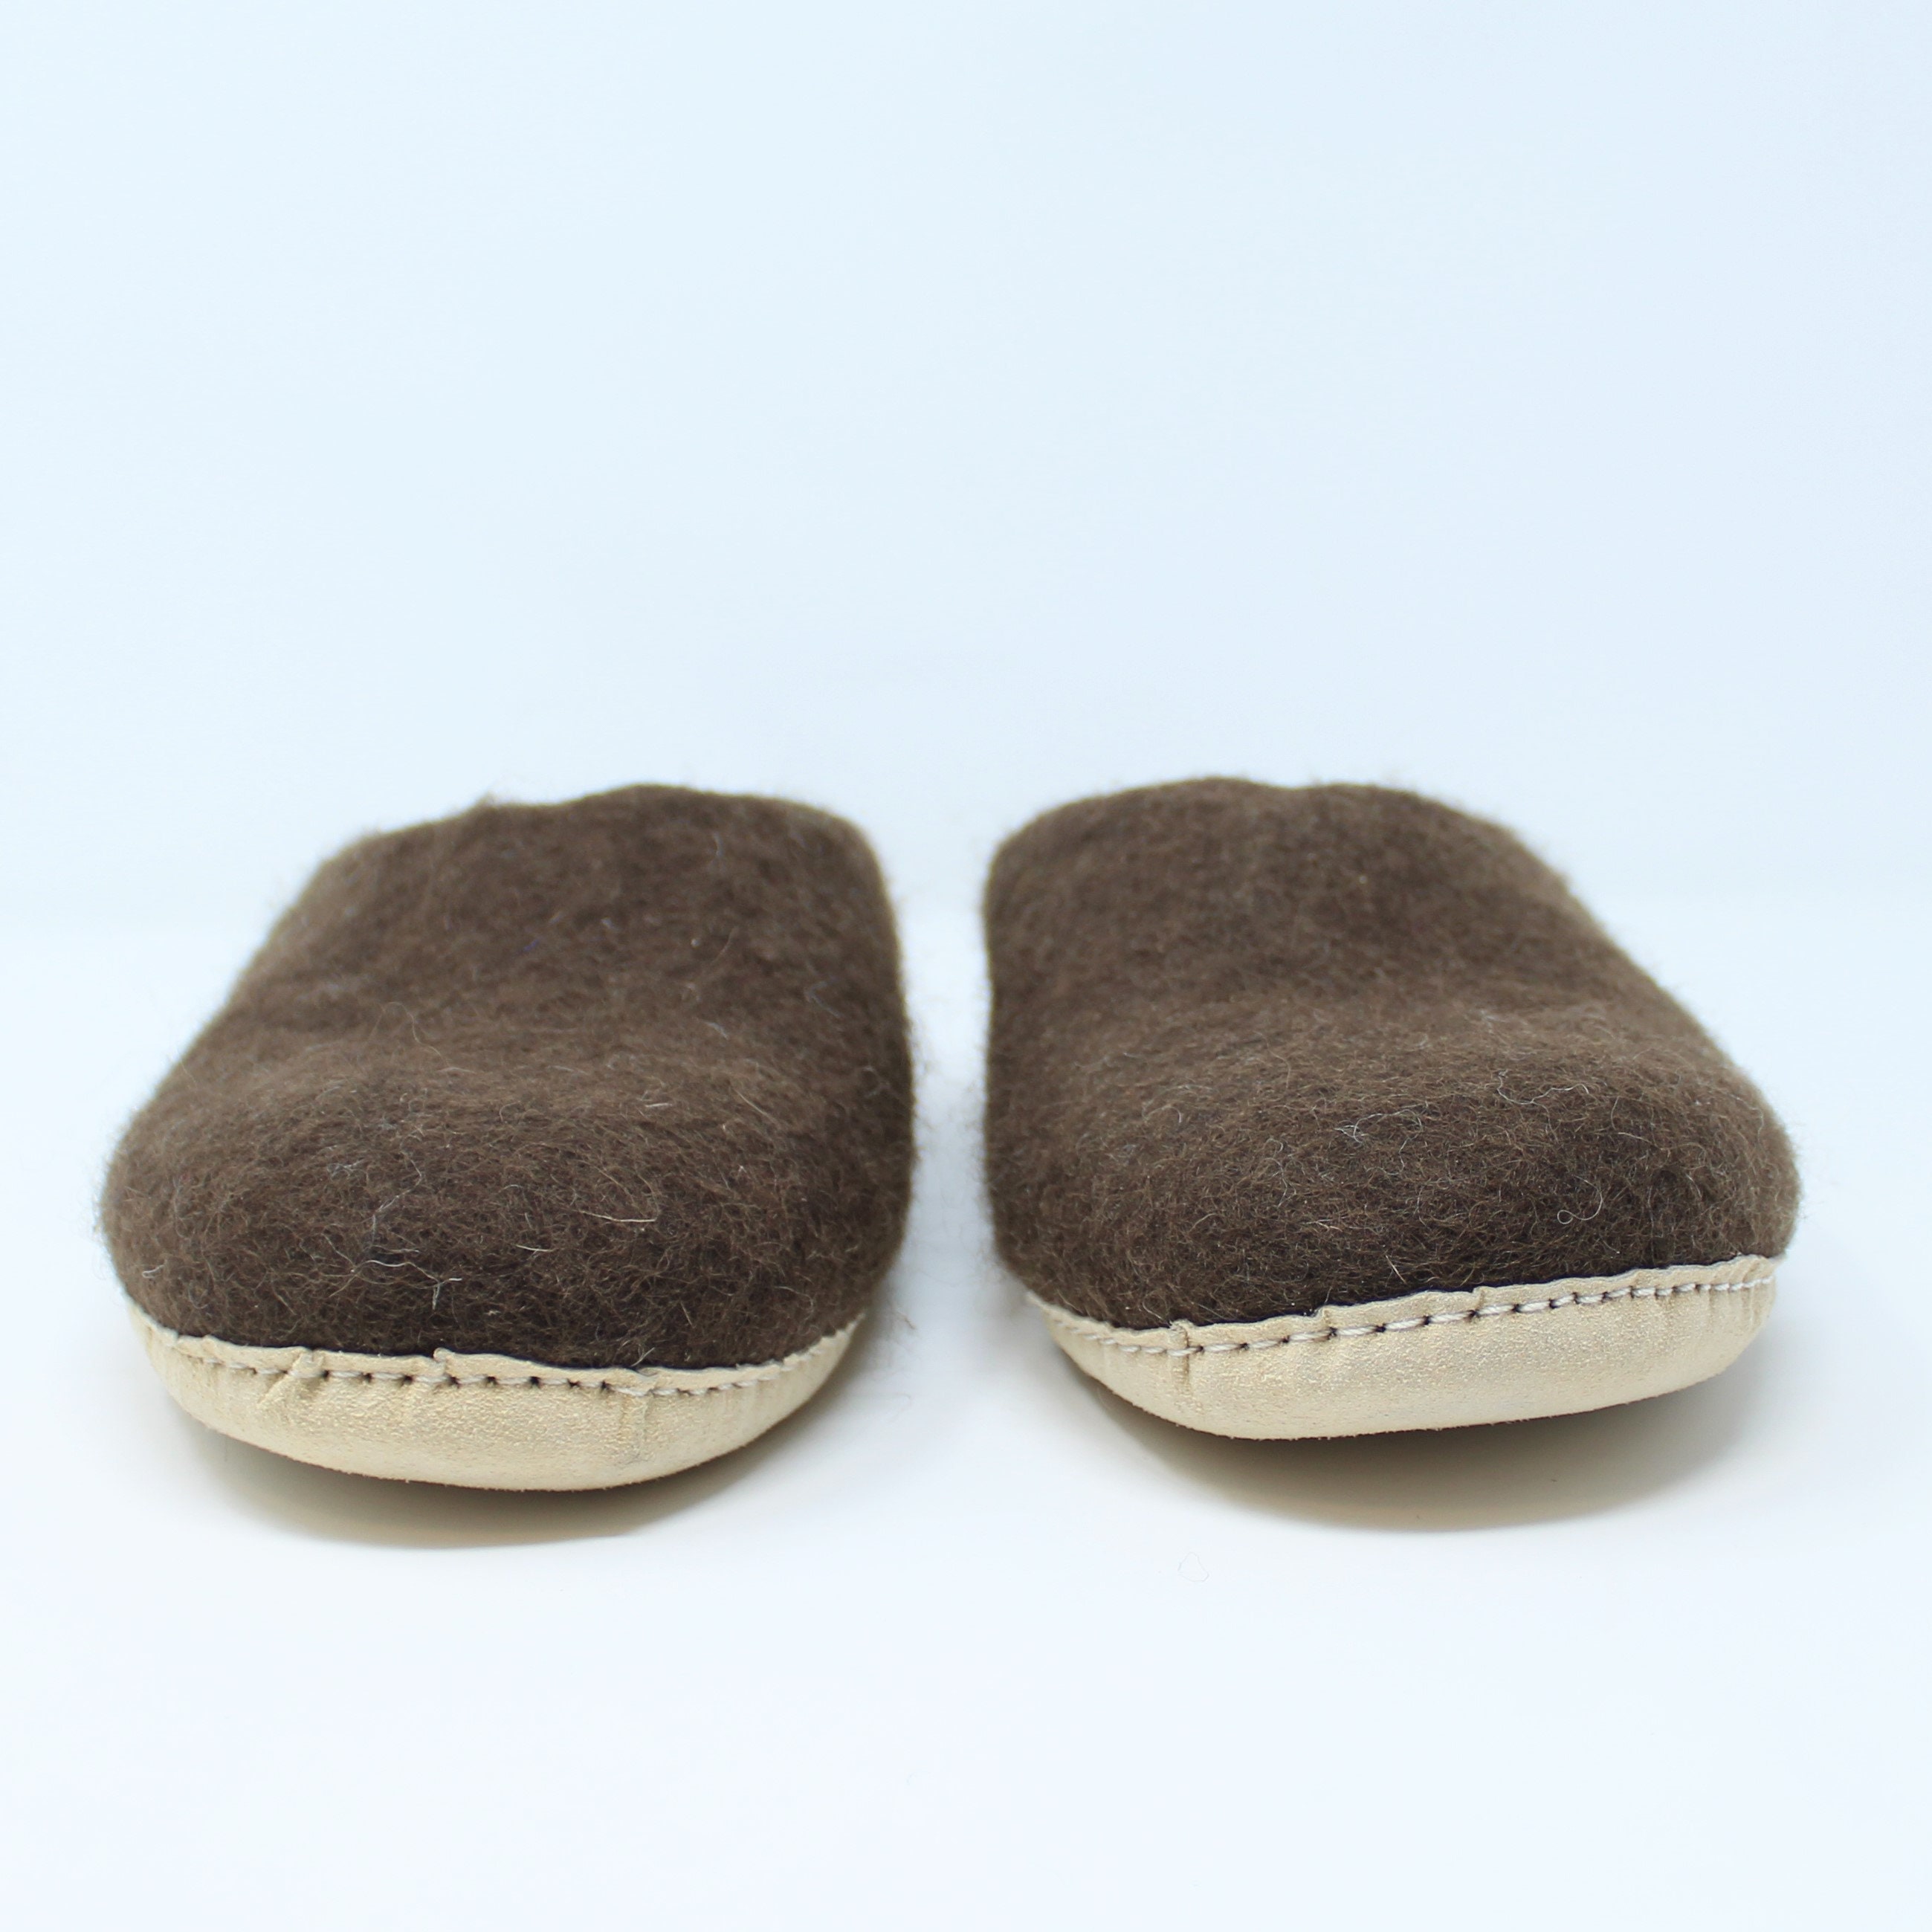 Best Gift For Men | Mens Winter Felted Wool Slippers in Brown | Felted ...